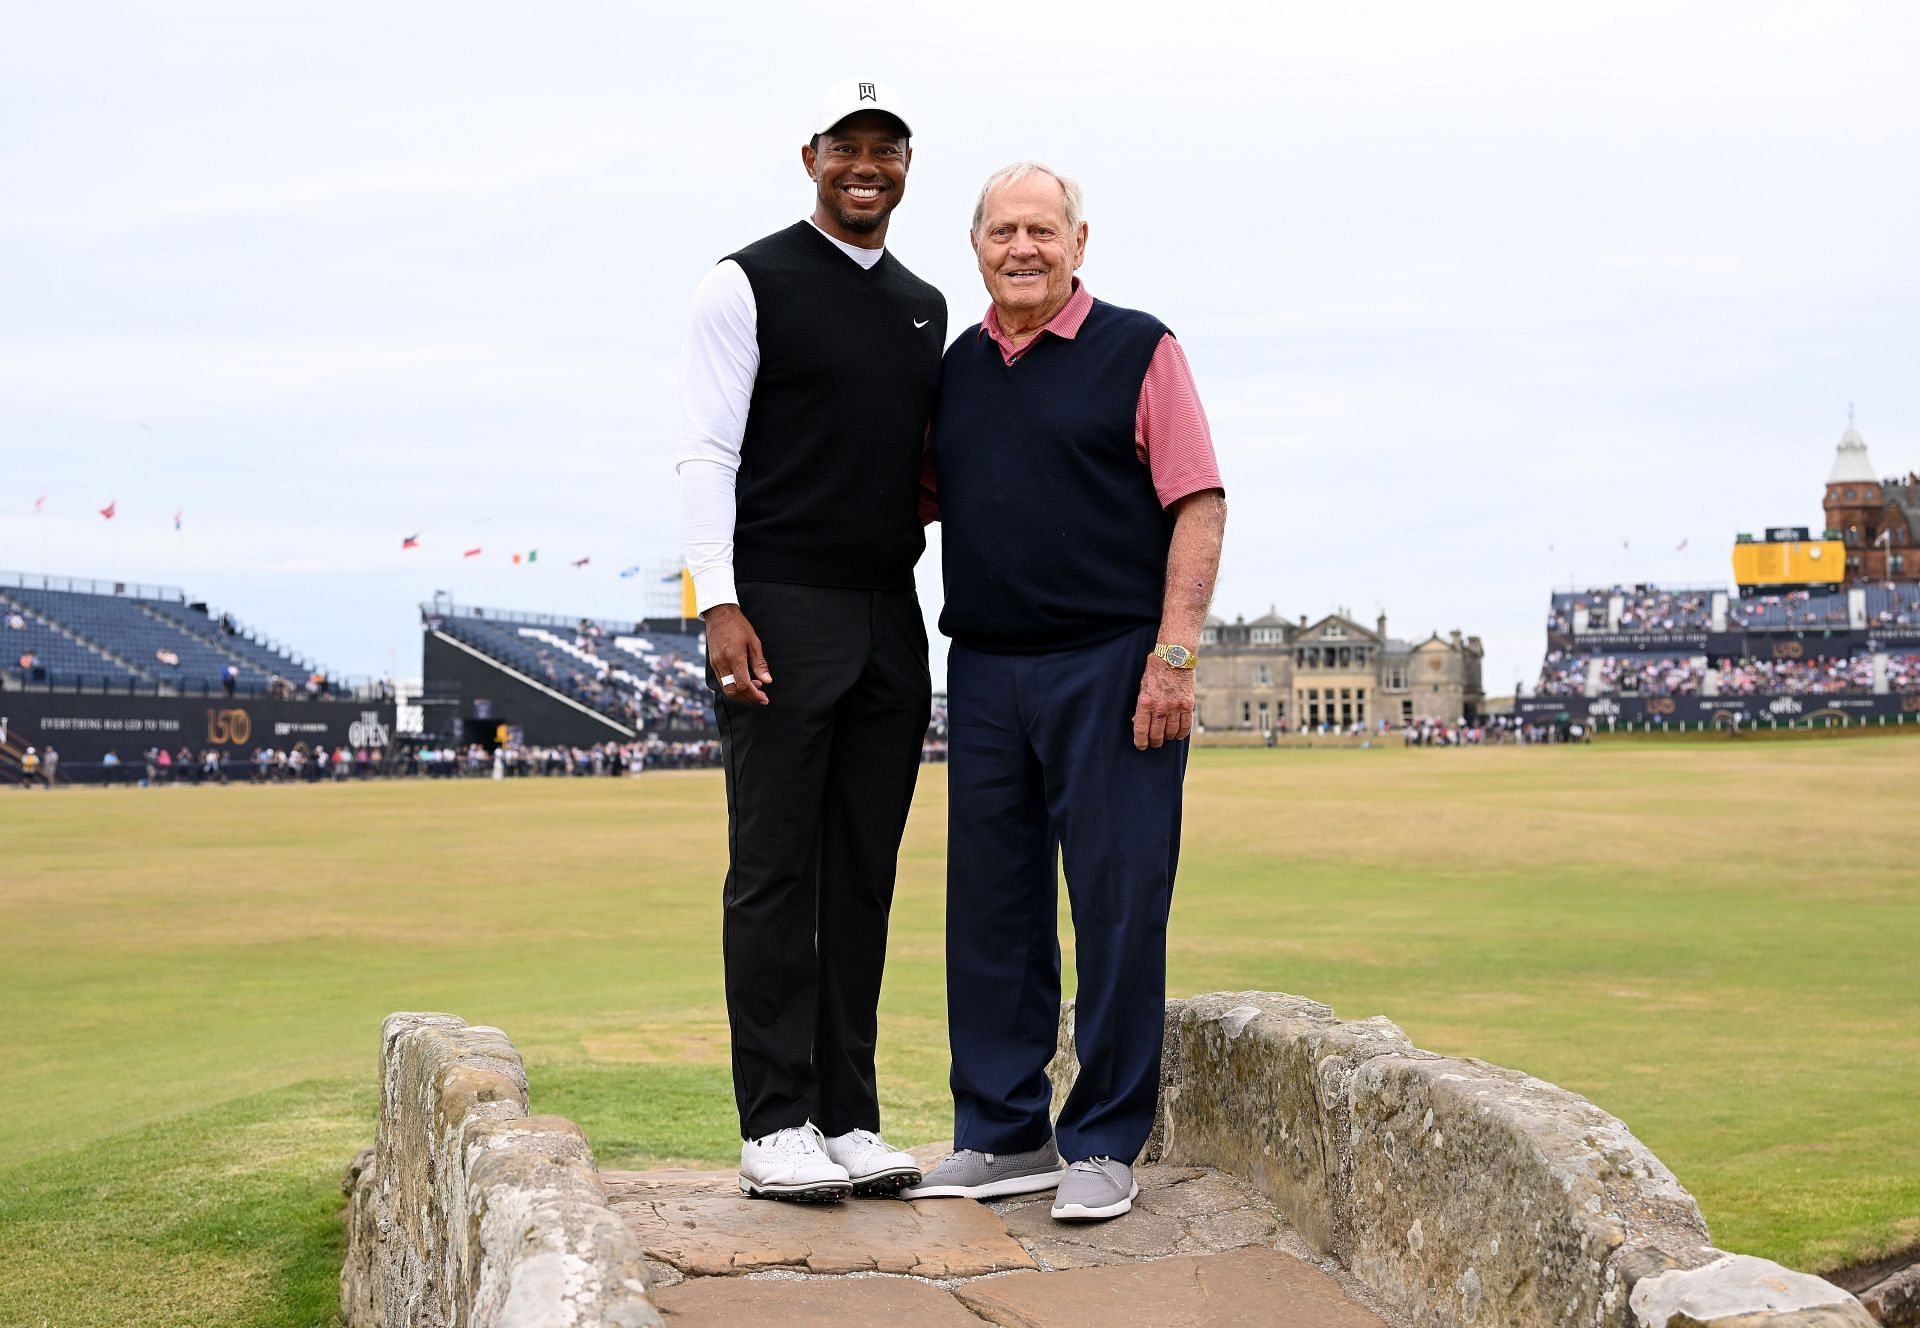 Tiger Woods and Jack Nicklaus at The 150th Open - Previews (Image via Getty)